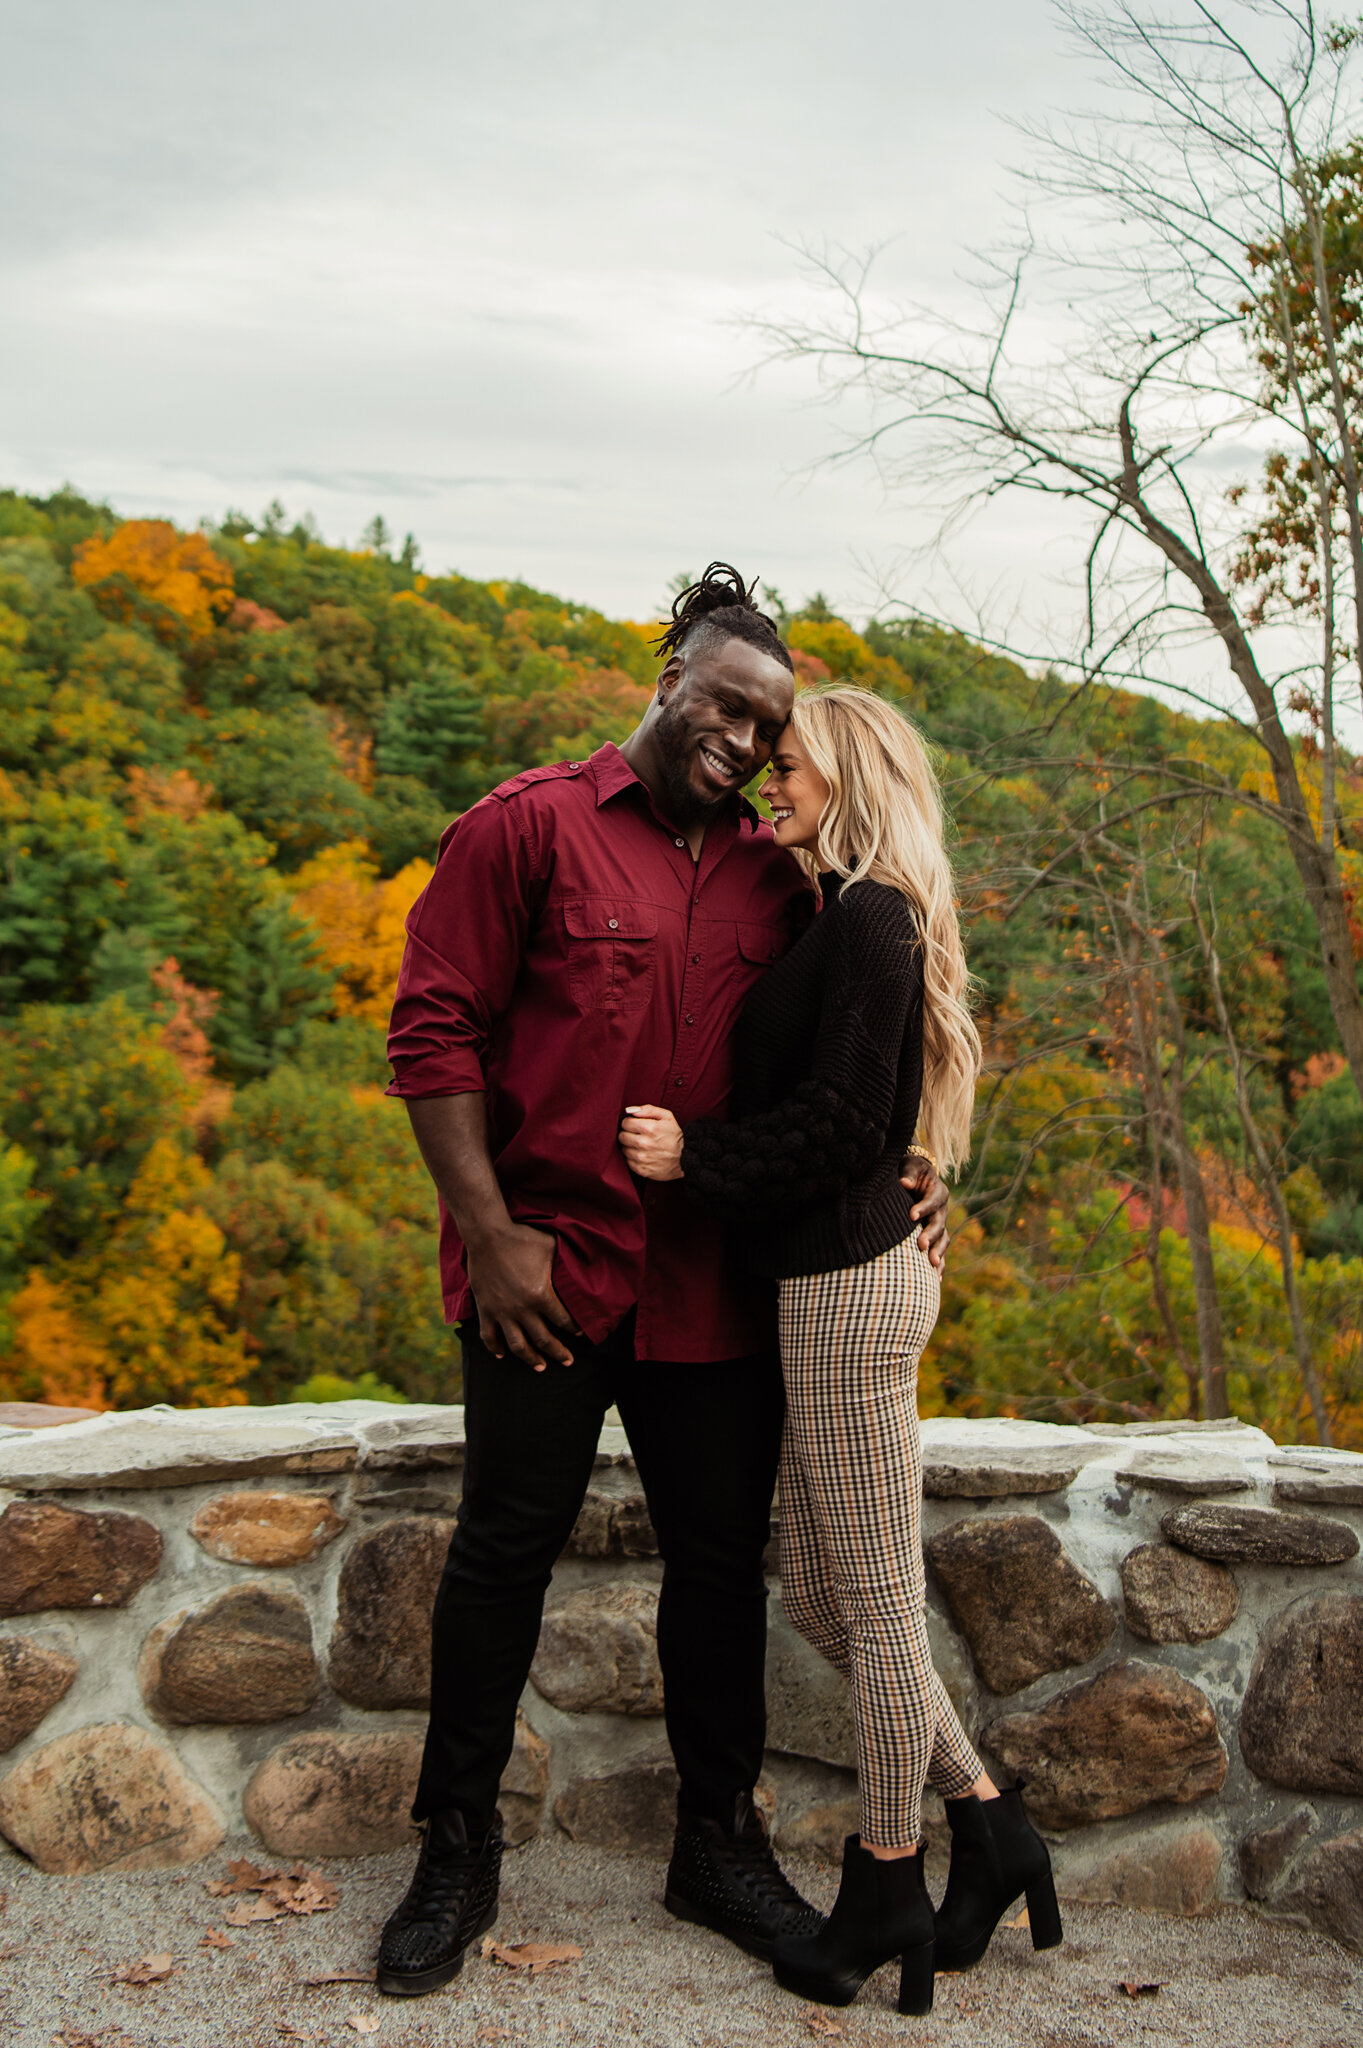 Letchworth_State_Park_Rochester_Couples_Session_JILL_STUDIO_Rochester_NY_Photographer_9424.jpg